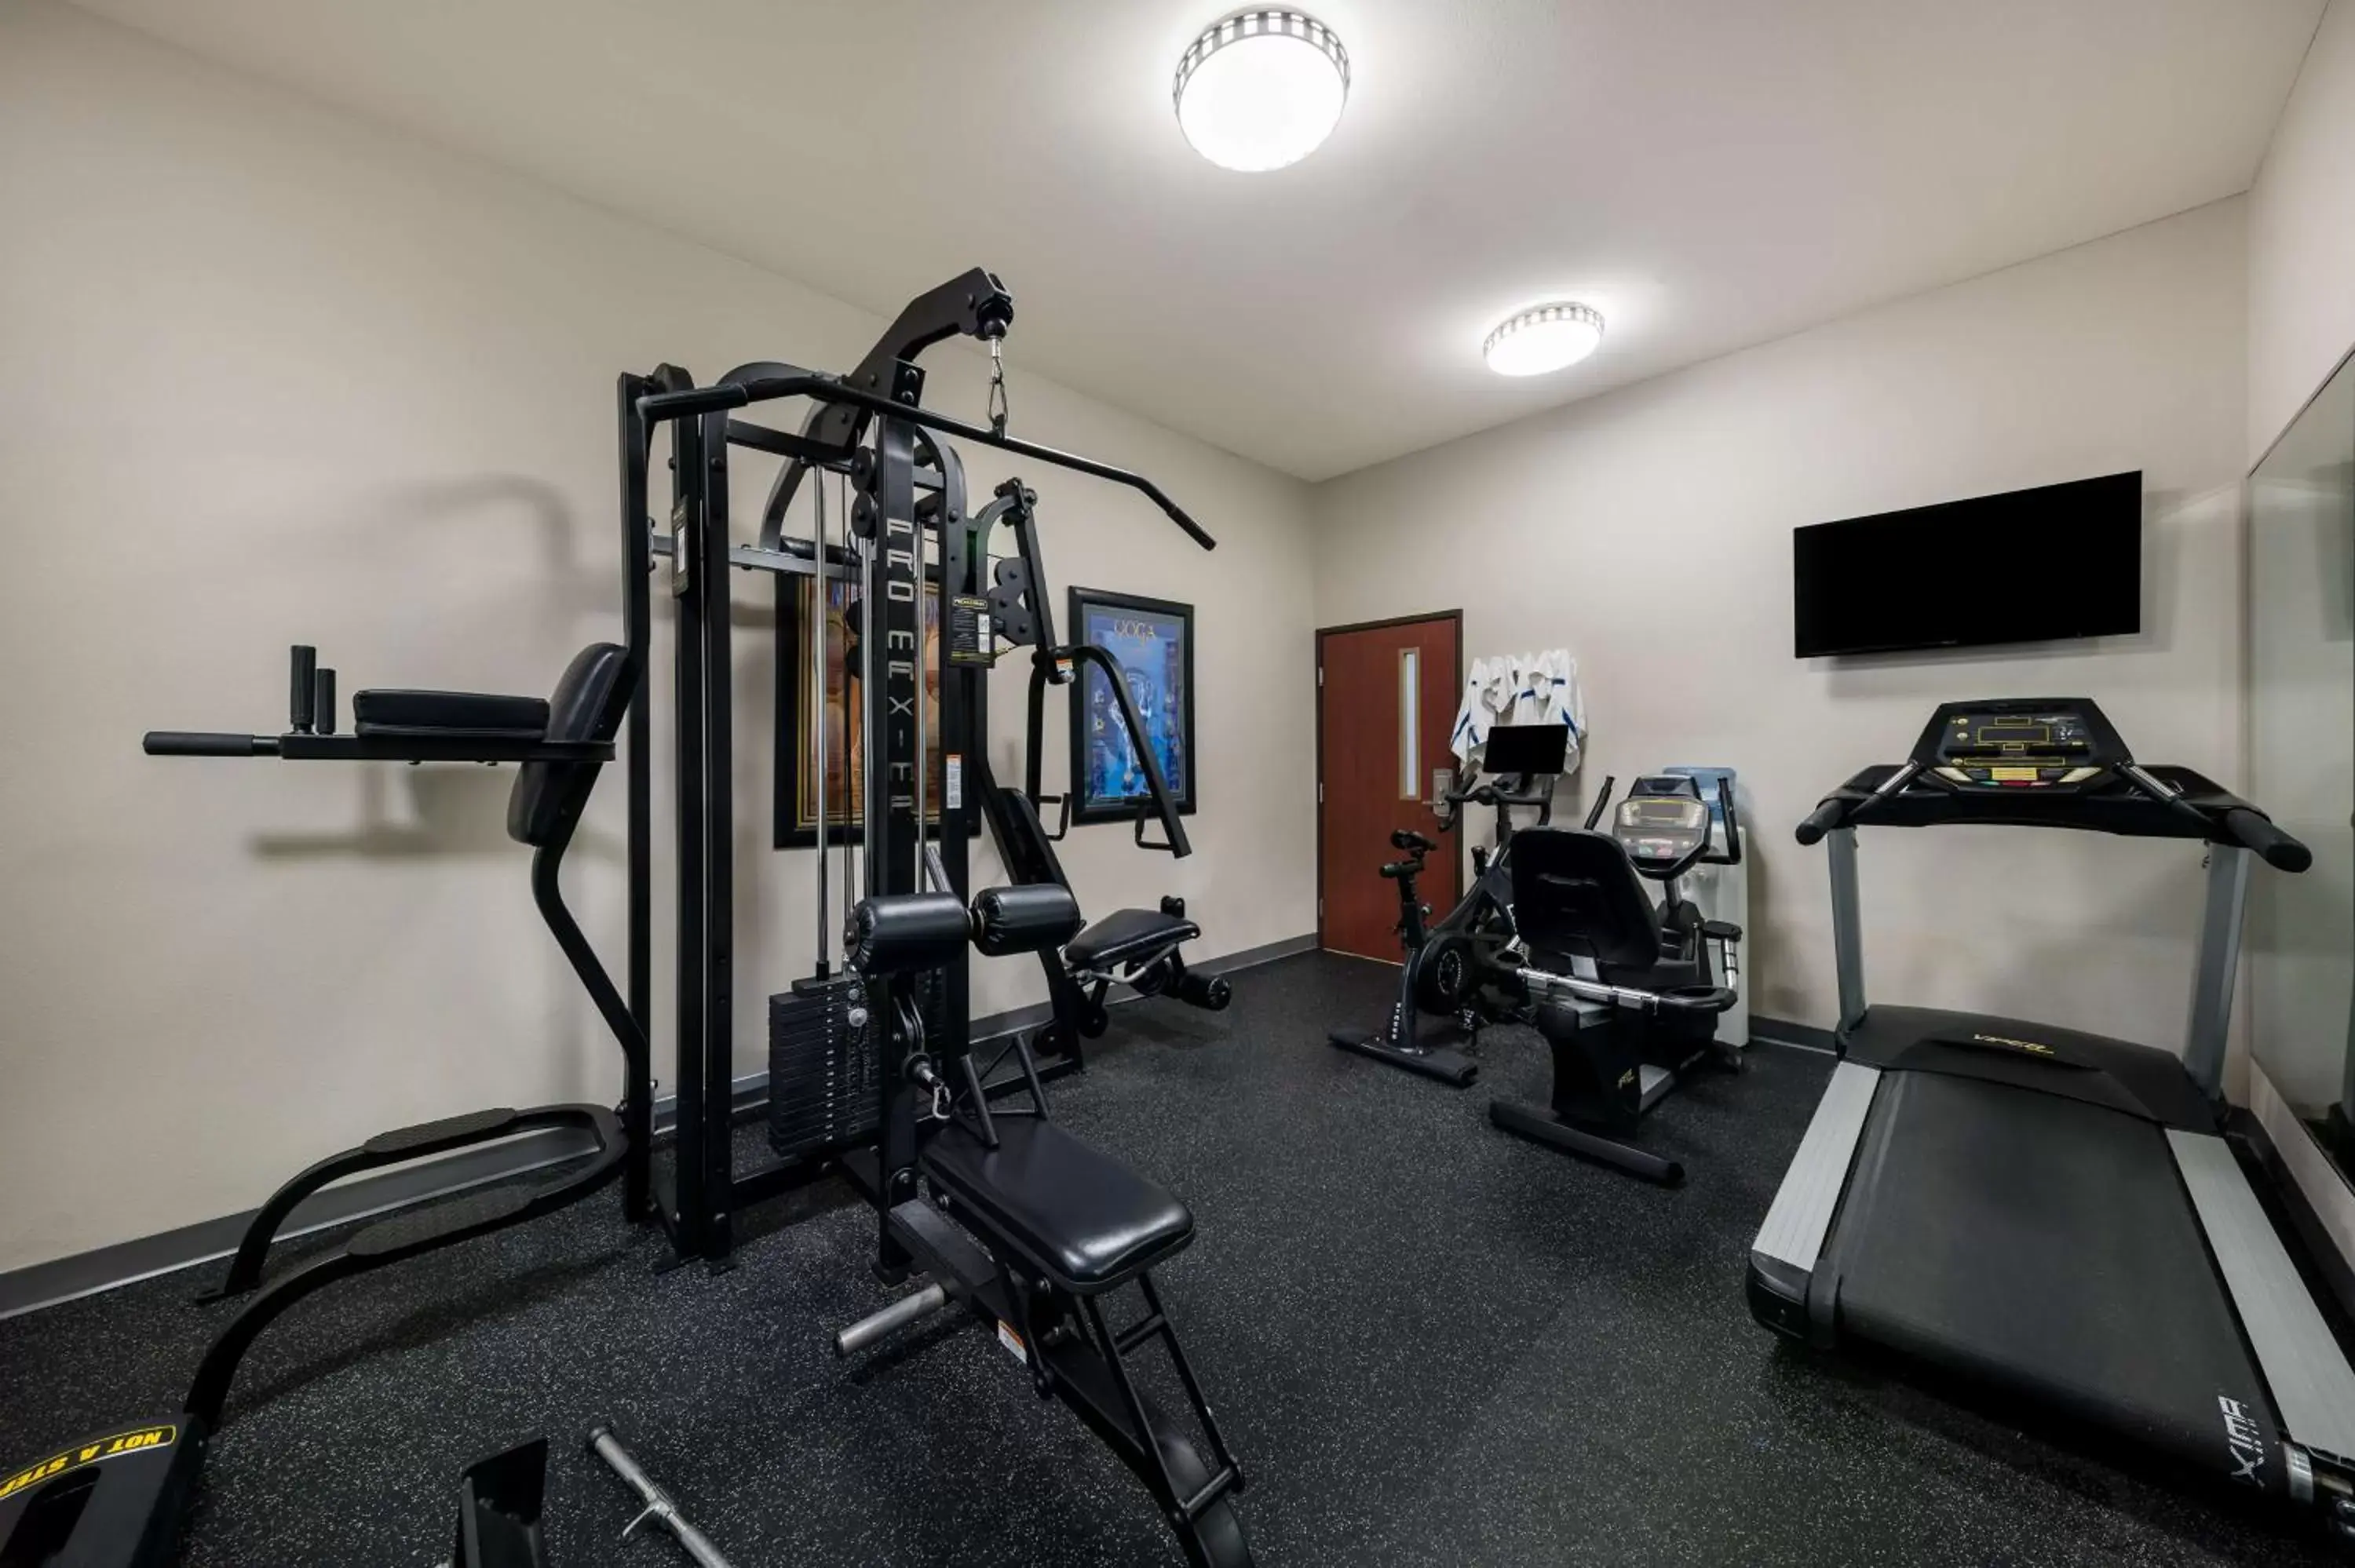 Fitness centre/facilities, Fitness Center/Facilities in Best Western Plus Lake Dallas Inn & Suites